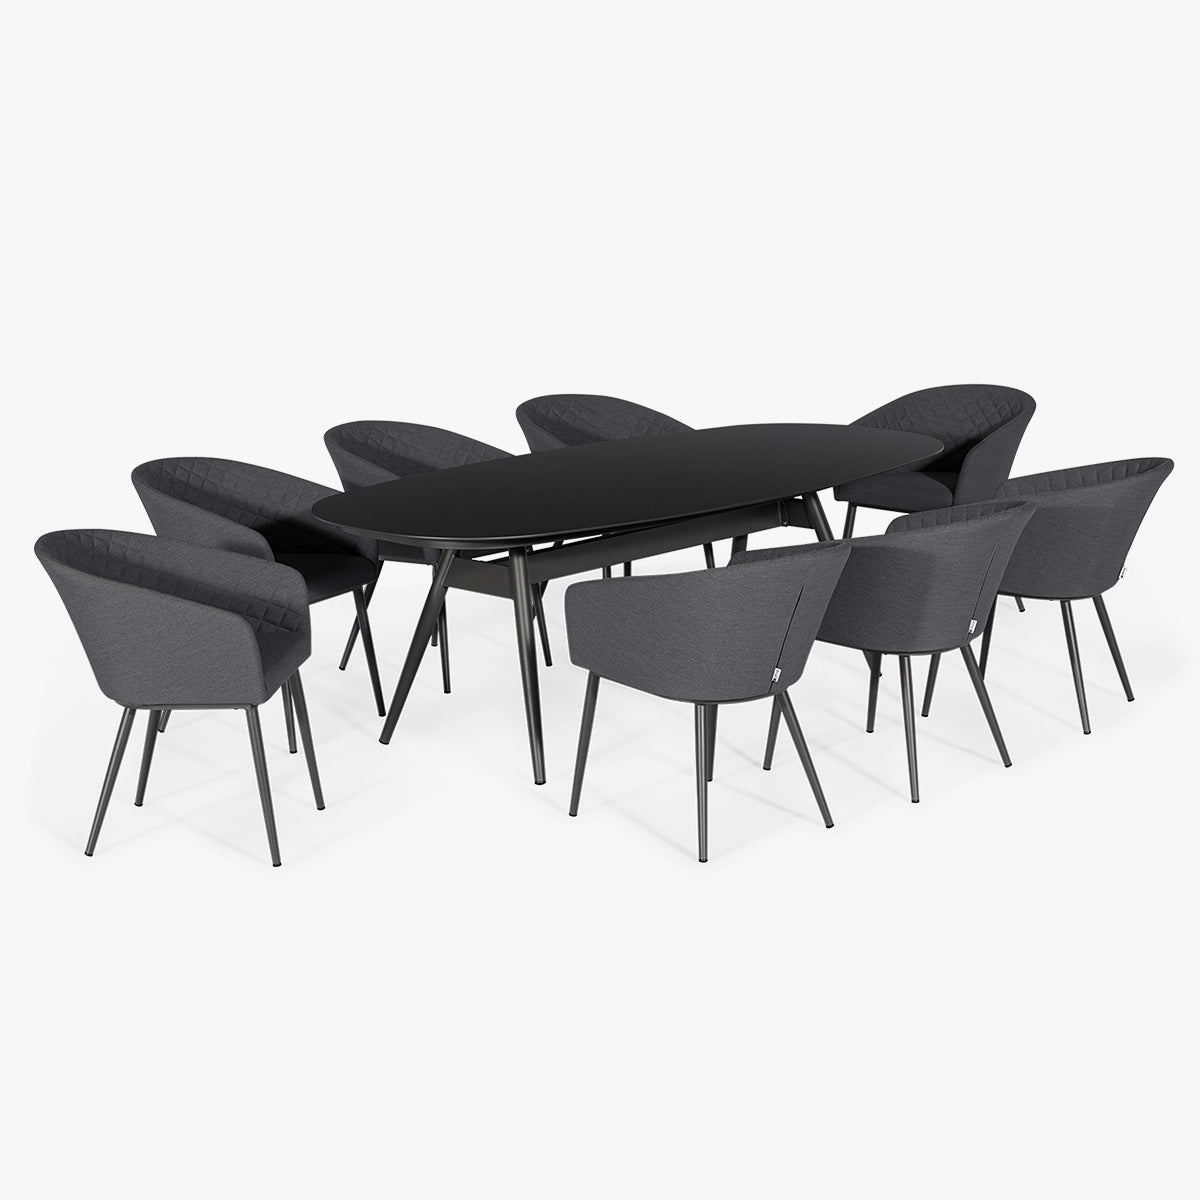 Outdoor Fabric Ambition 8 Seat Oval Dining Set